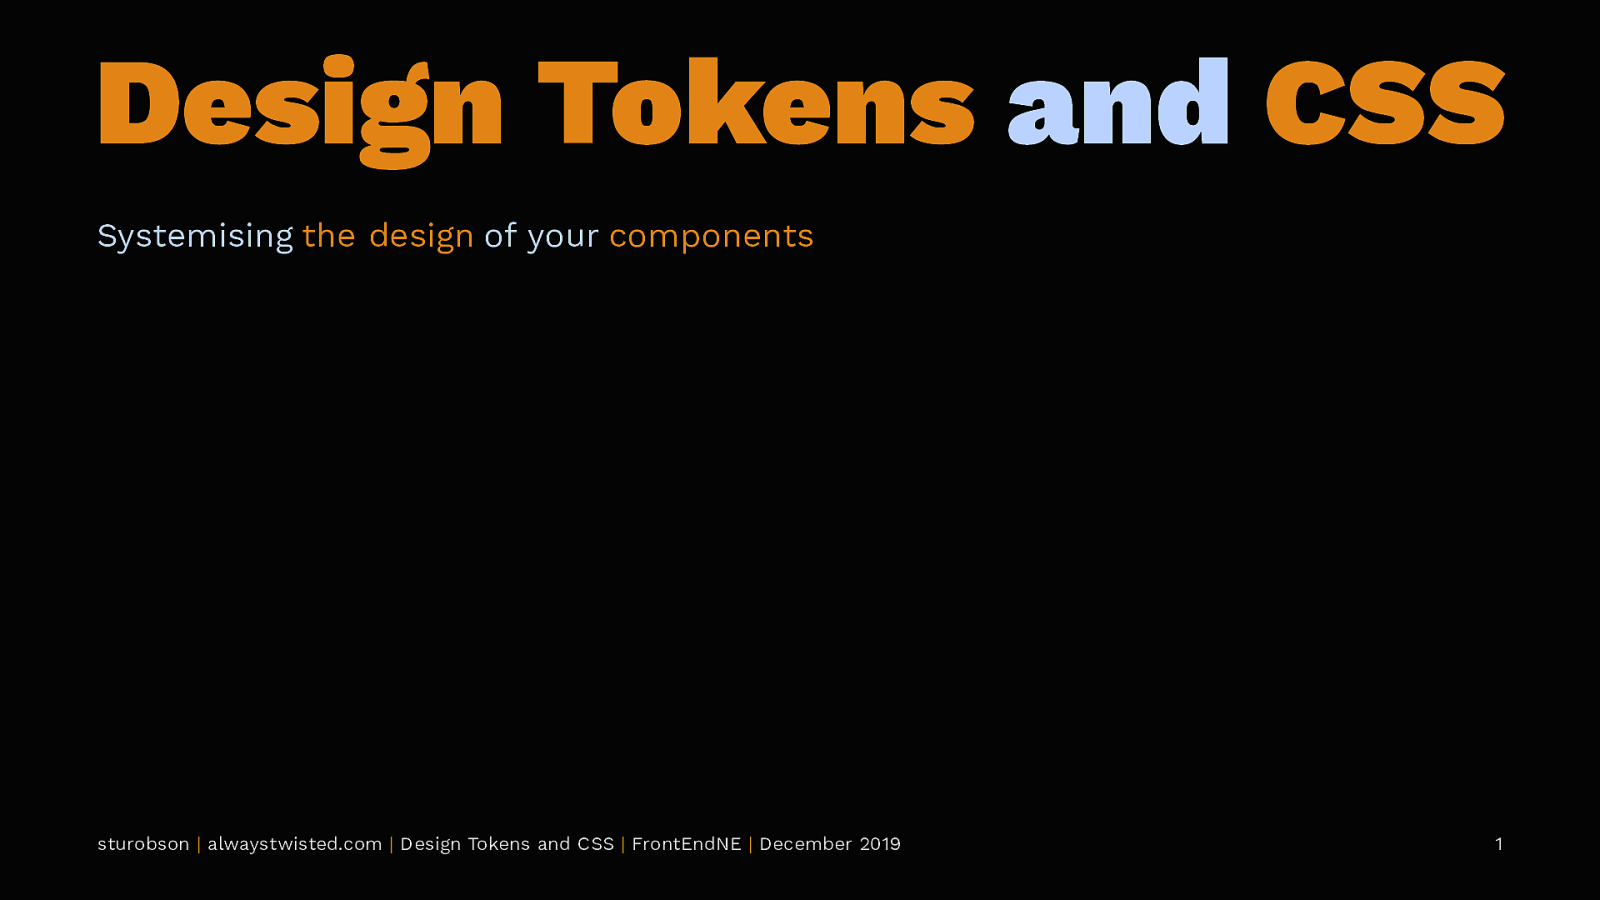 Design Tokens and CSS: Systemising the Design of Components